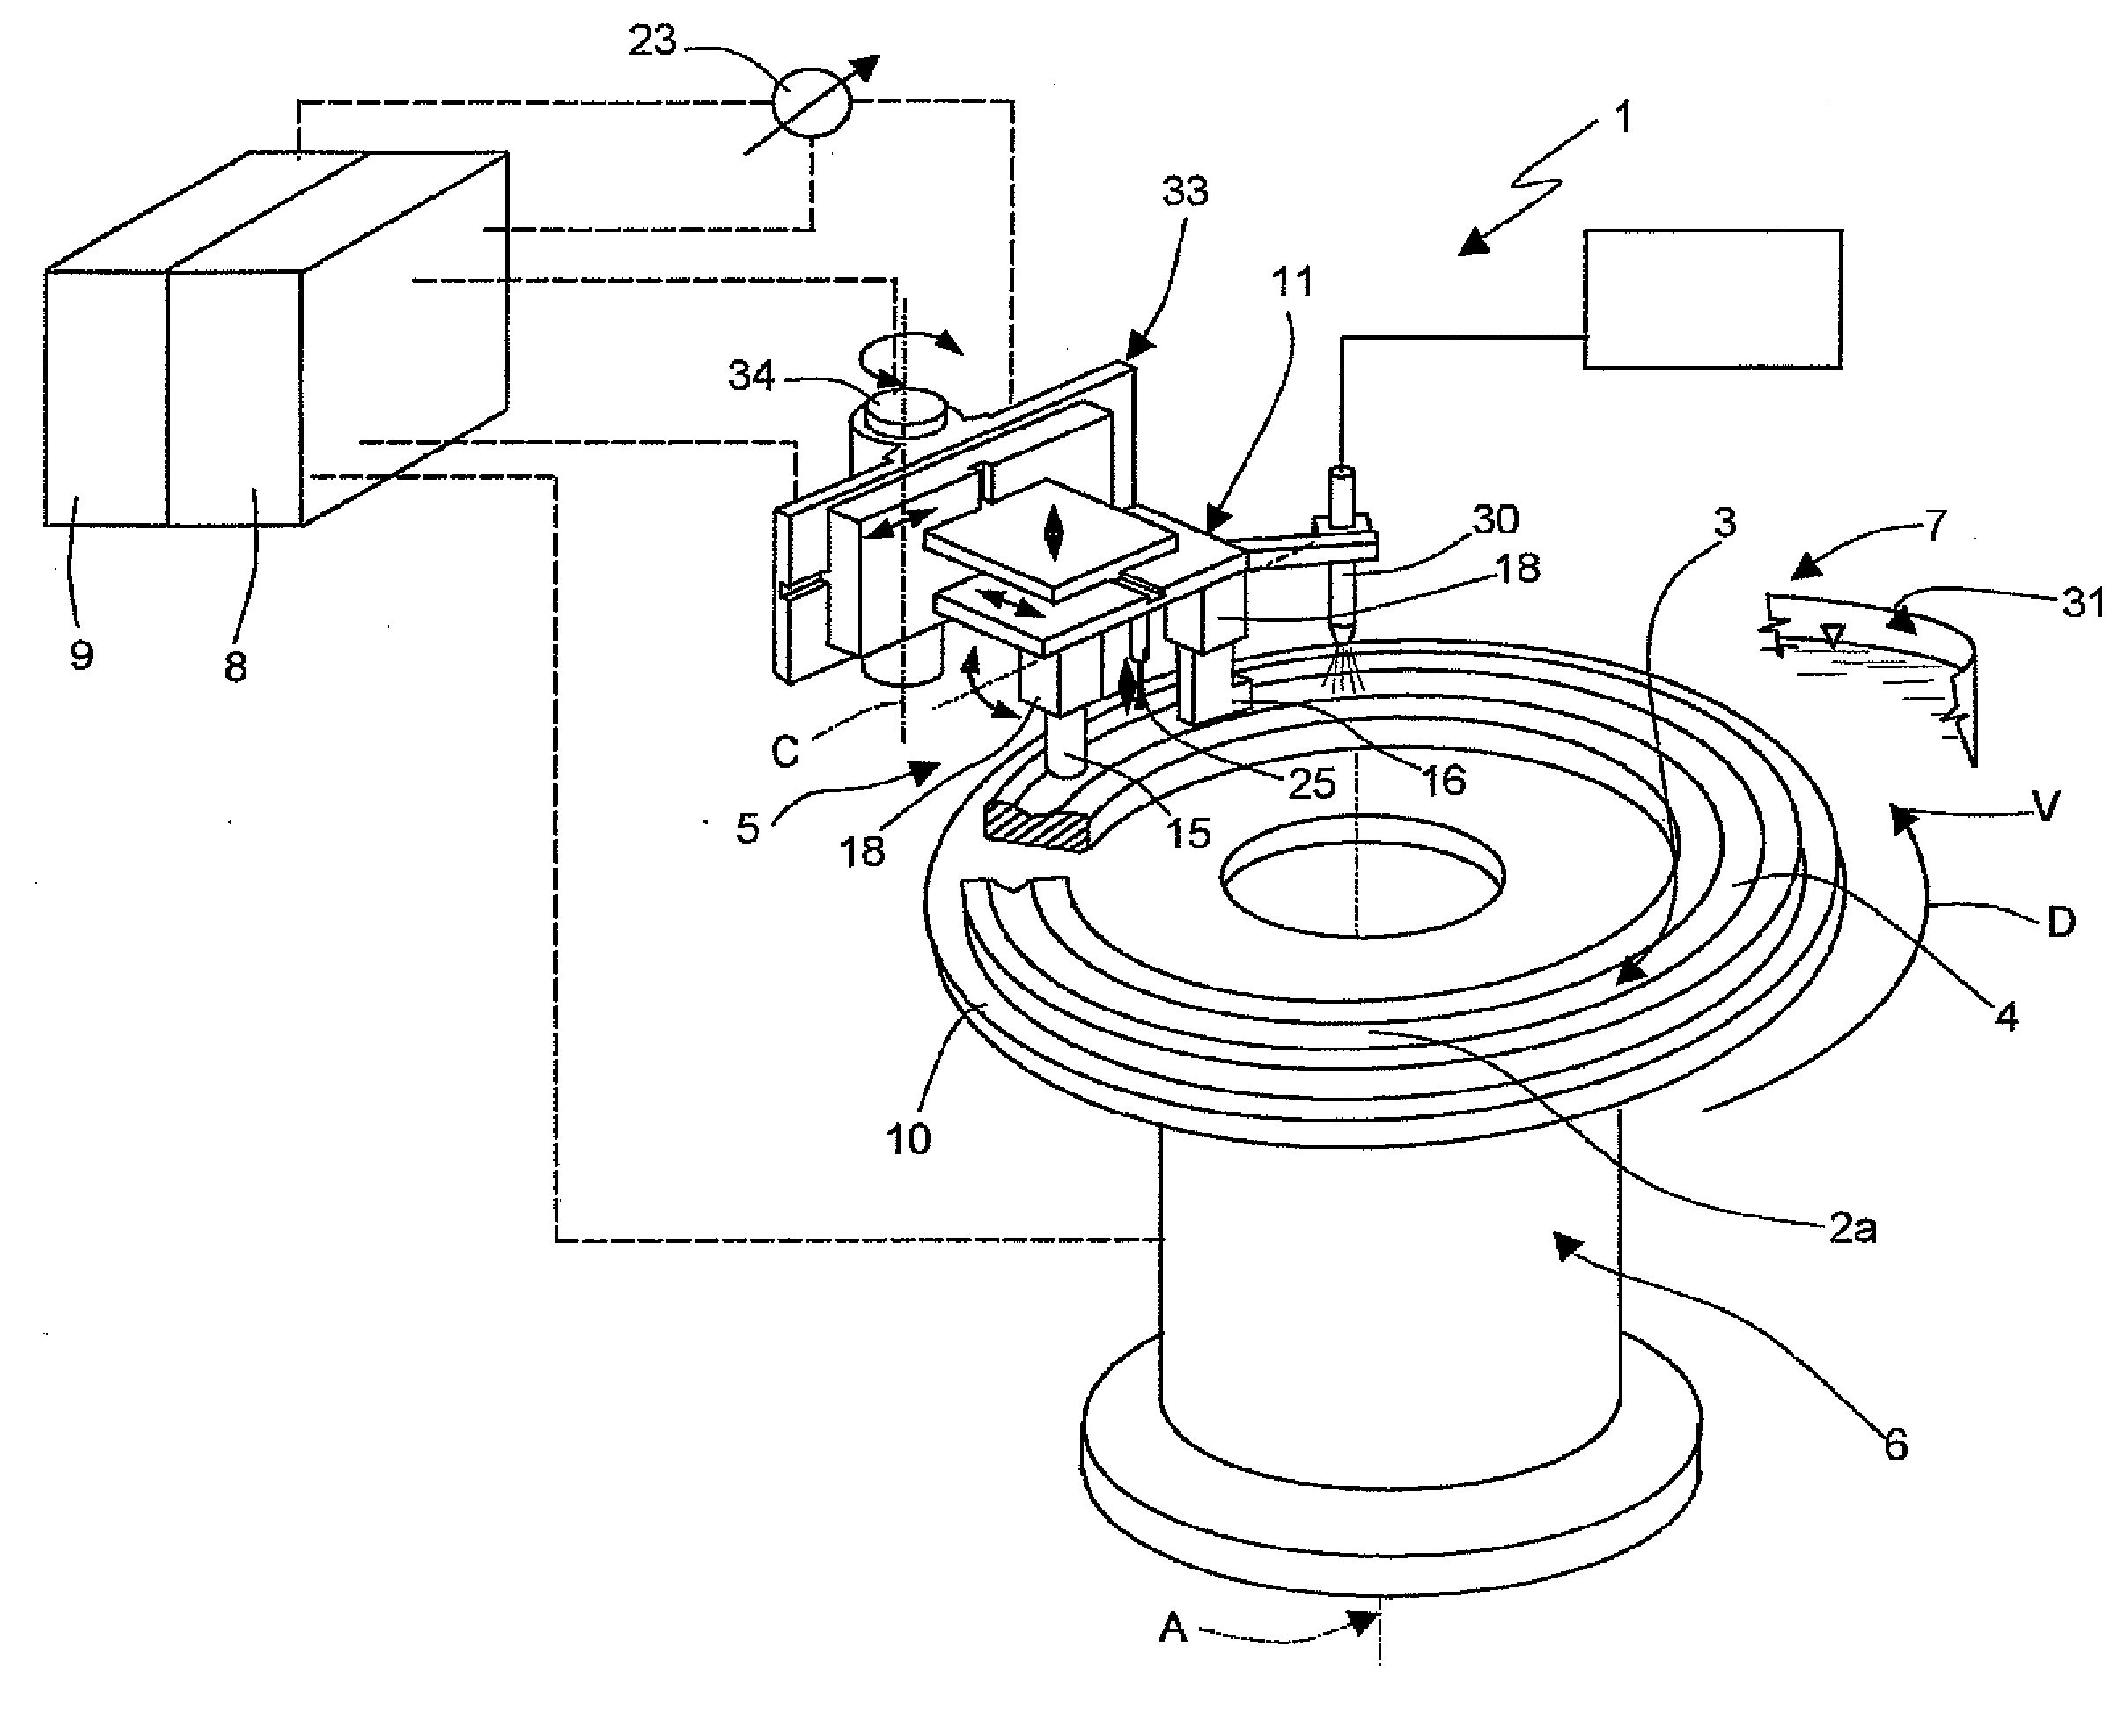 Device and method for performing a localized induction hardening treatment on mechanical components, specifically thrust blocks for large-sized rolling bearings